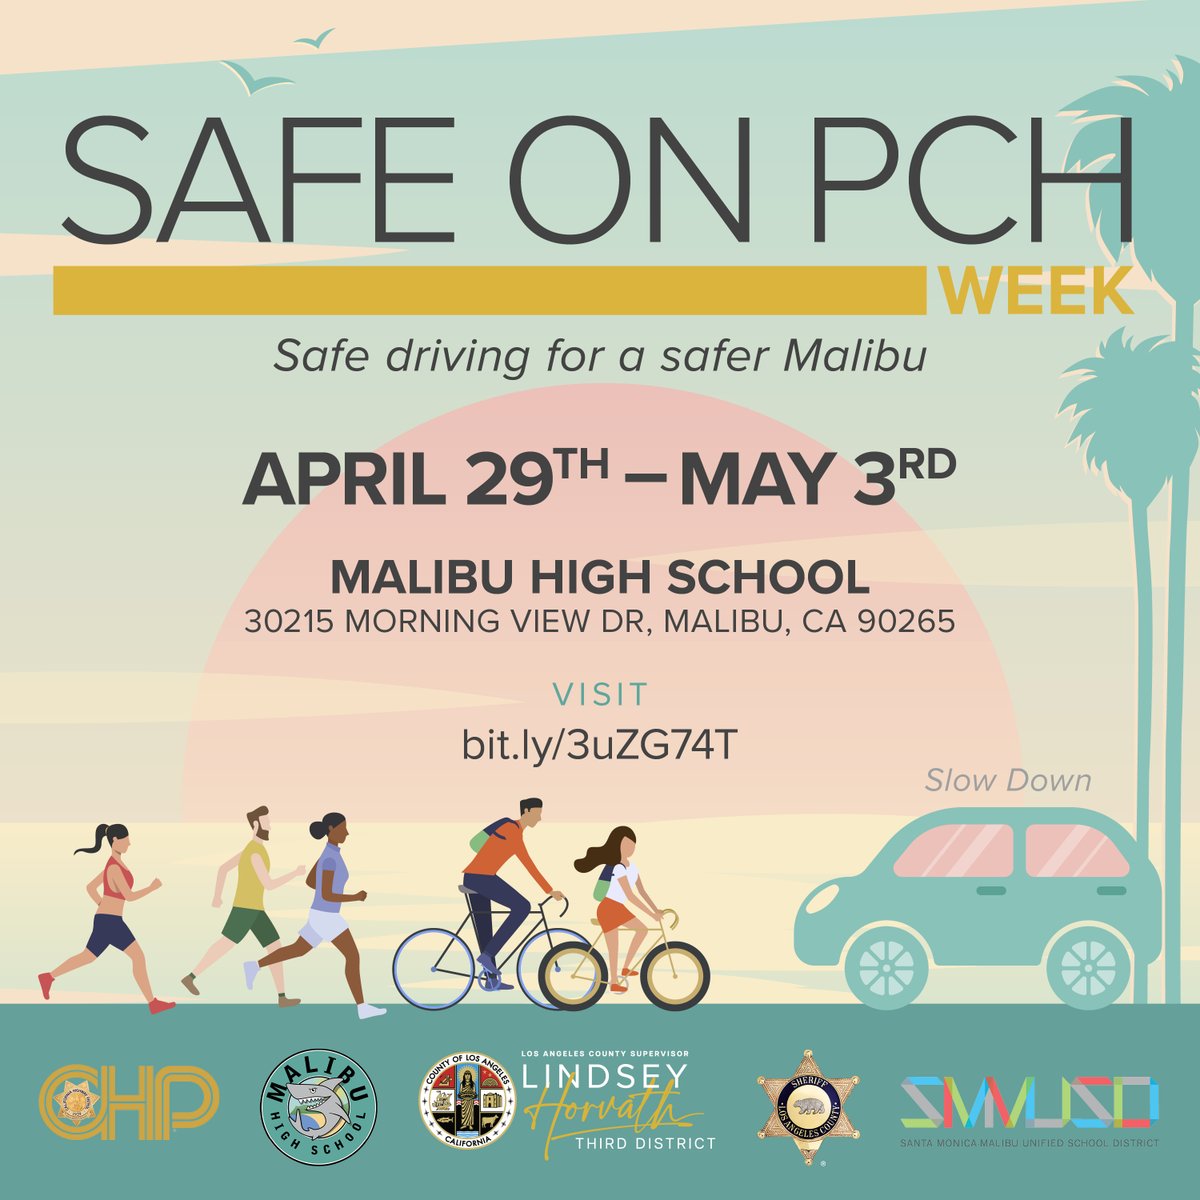 Join @LindseyPHorvath, @CHPWestValley, the City of Malibu, Malibu High School, PTSA Malibu, @SMMUSD, and the @lhslasd for 'Safe on PCH,' a week-long safe driving series at Malibu High School, April 29 - May 3. Event details: bit.ly/3uZG74T